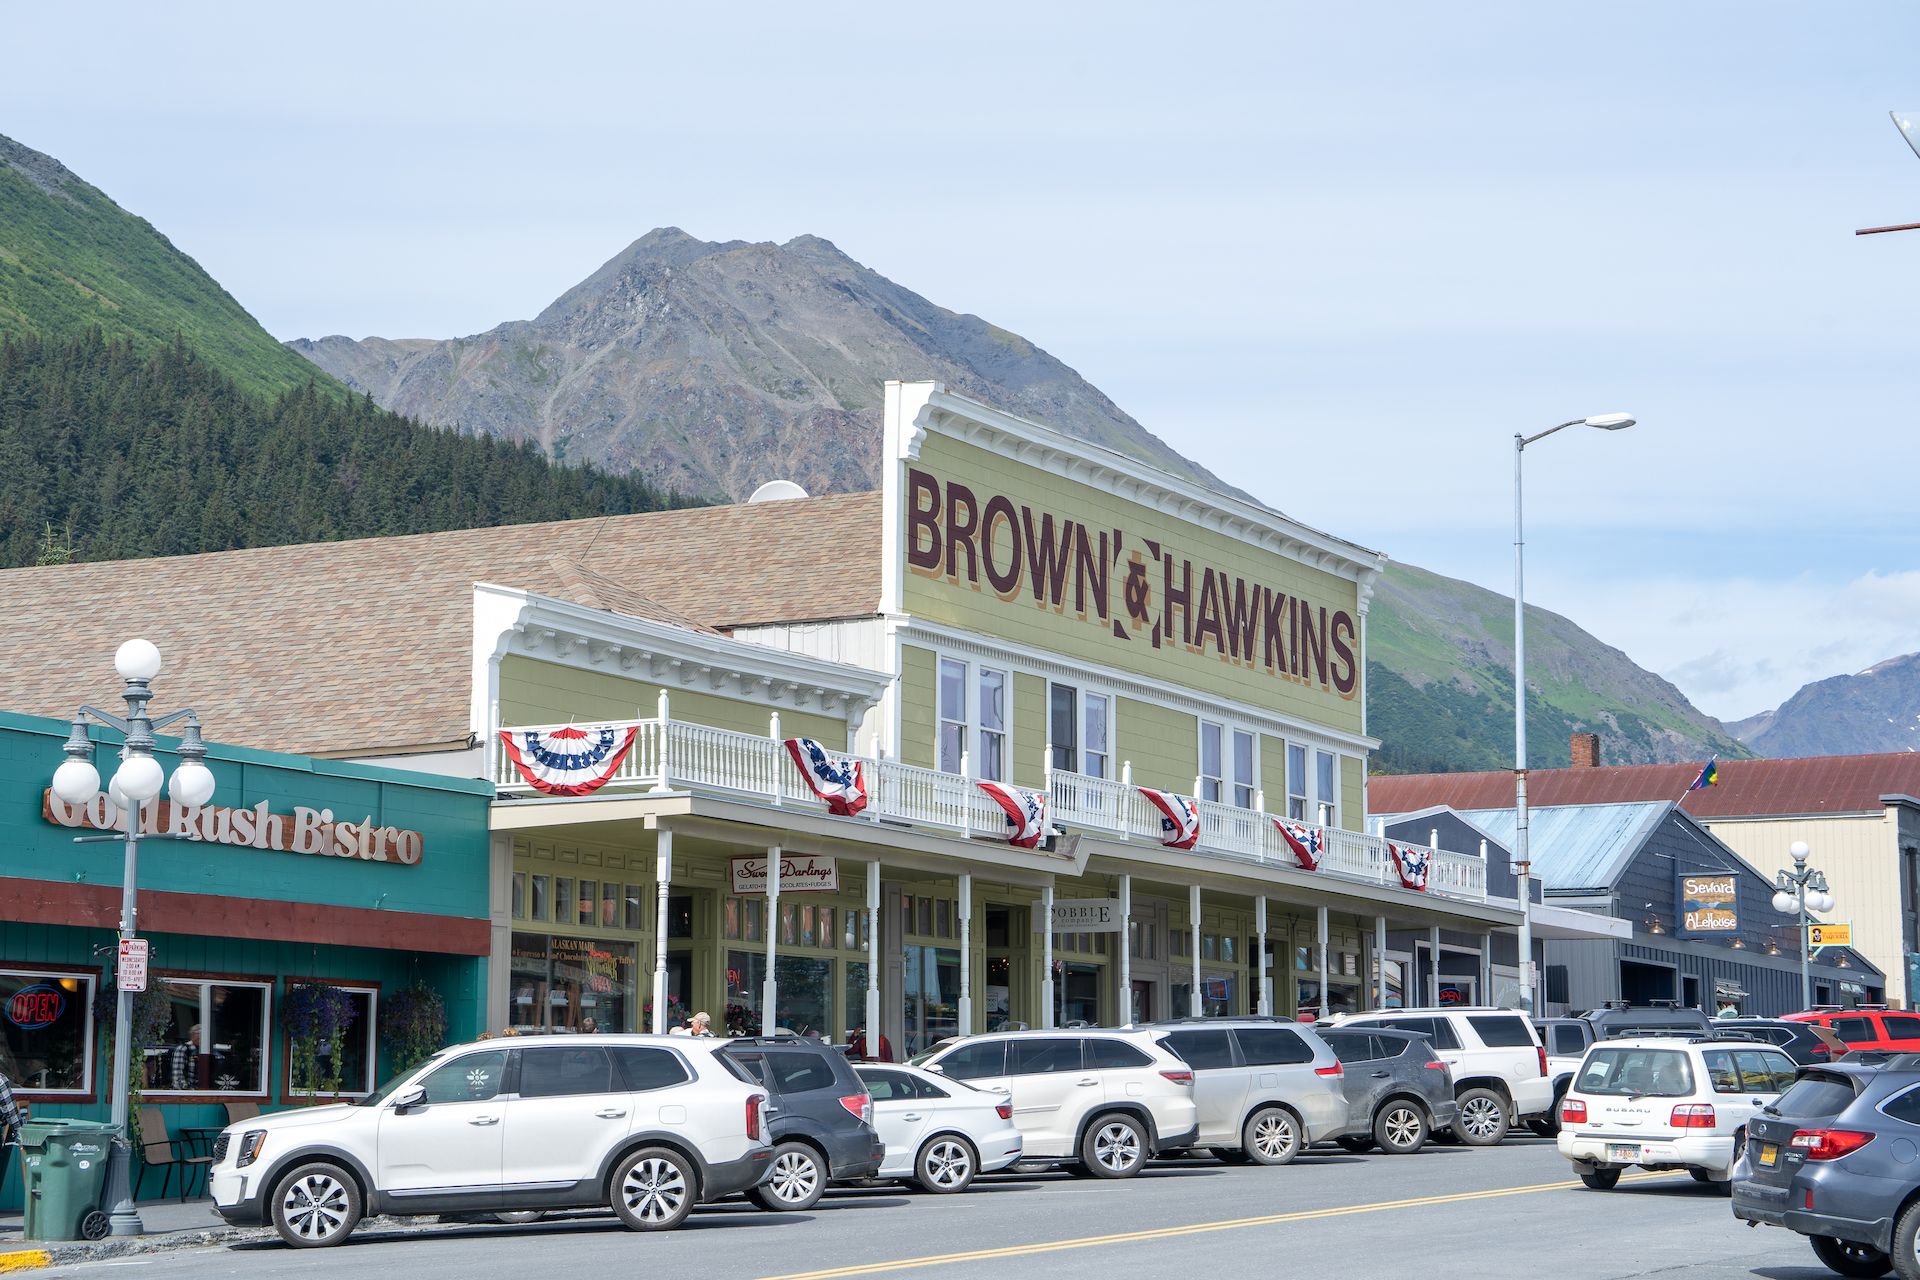 The main block in downtown Seward with the historic buildings